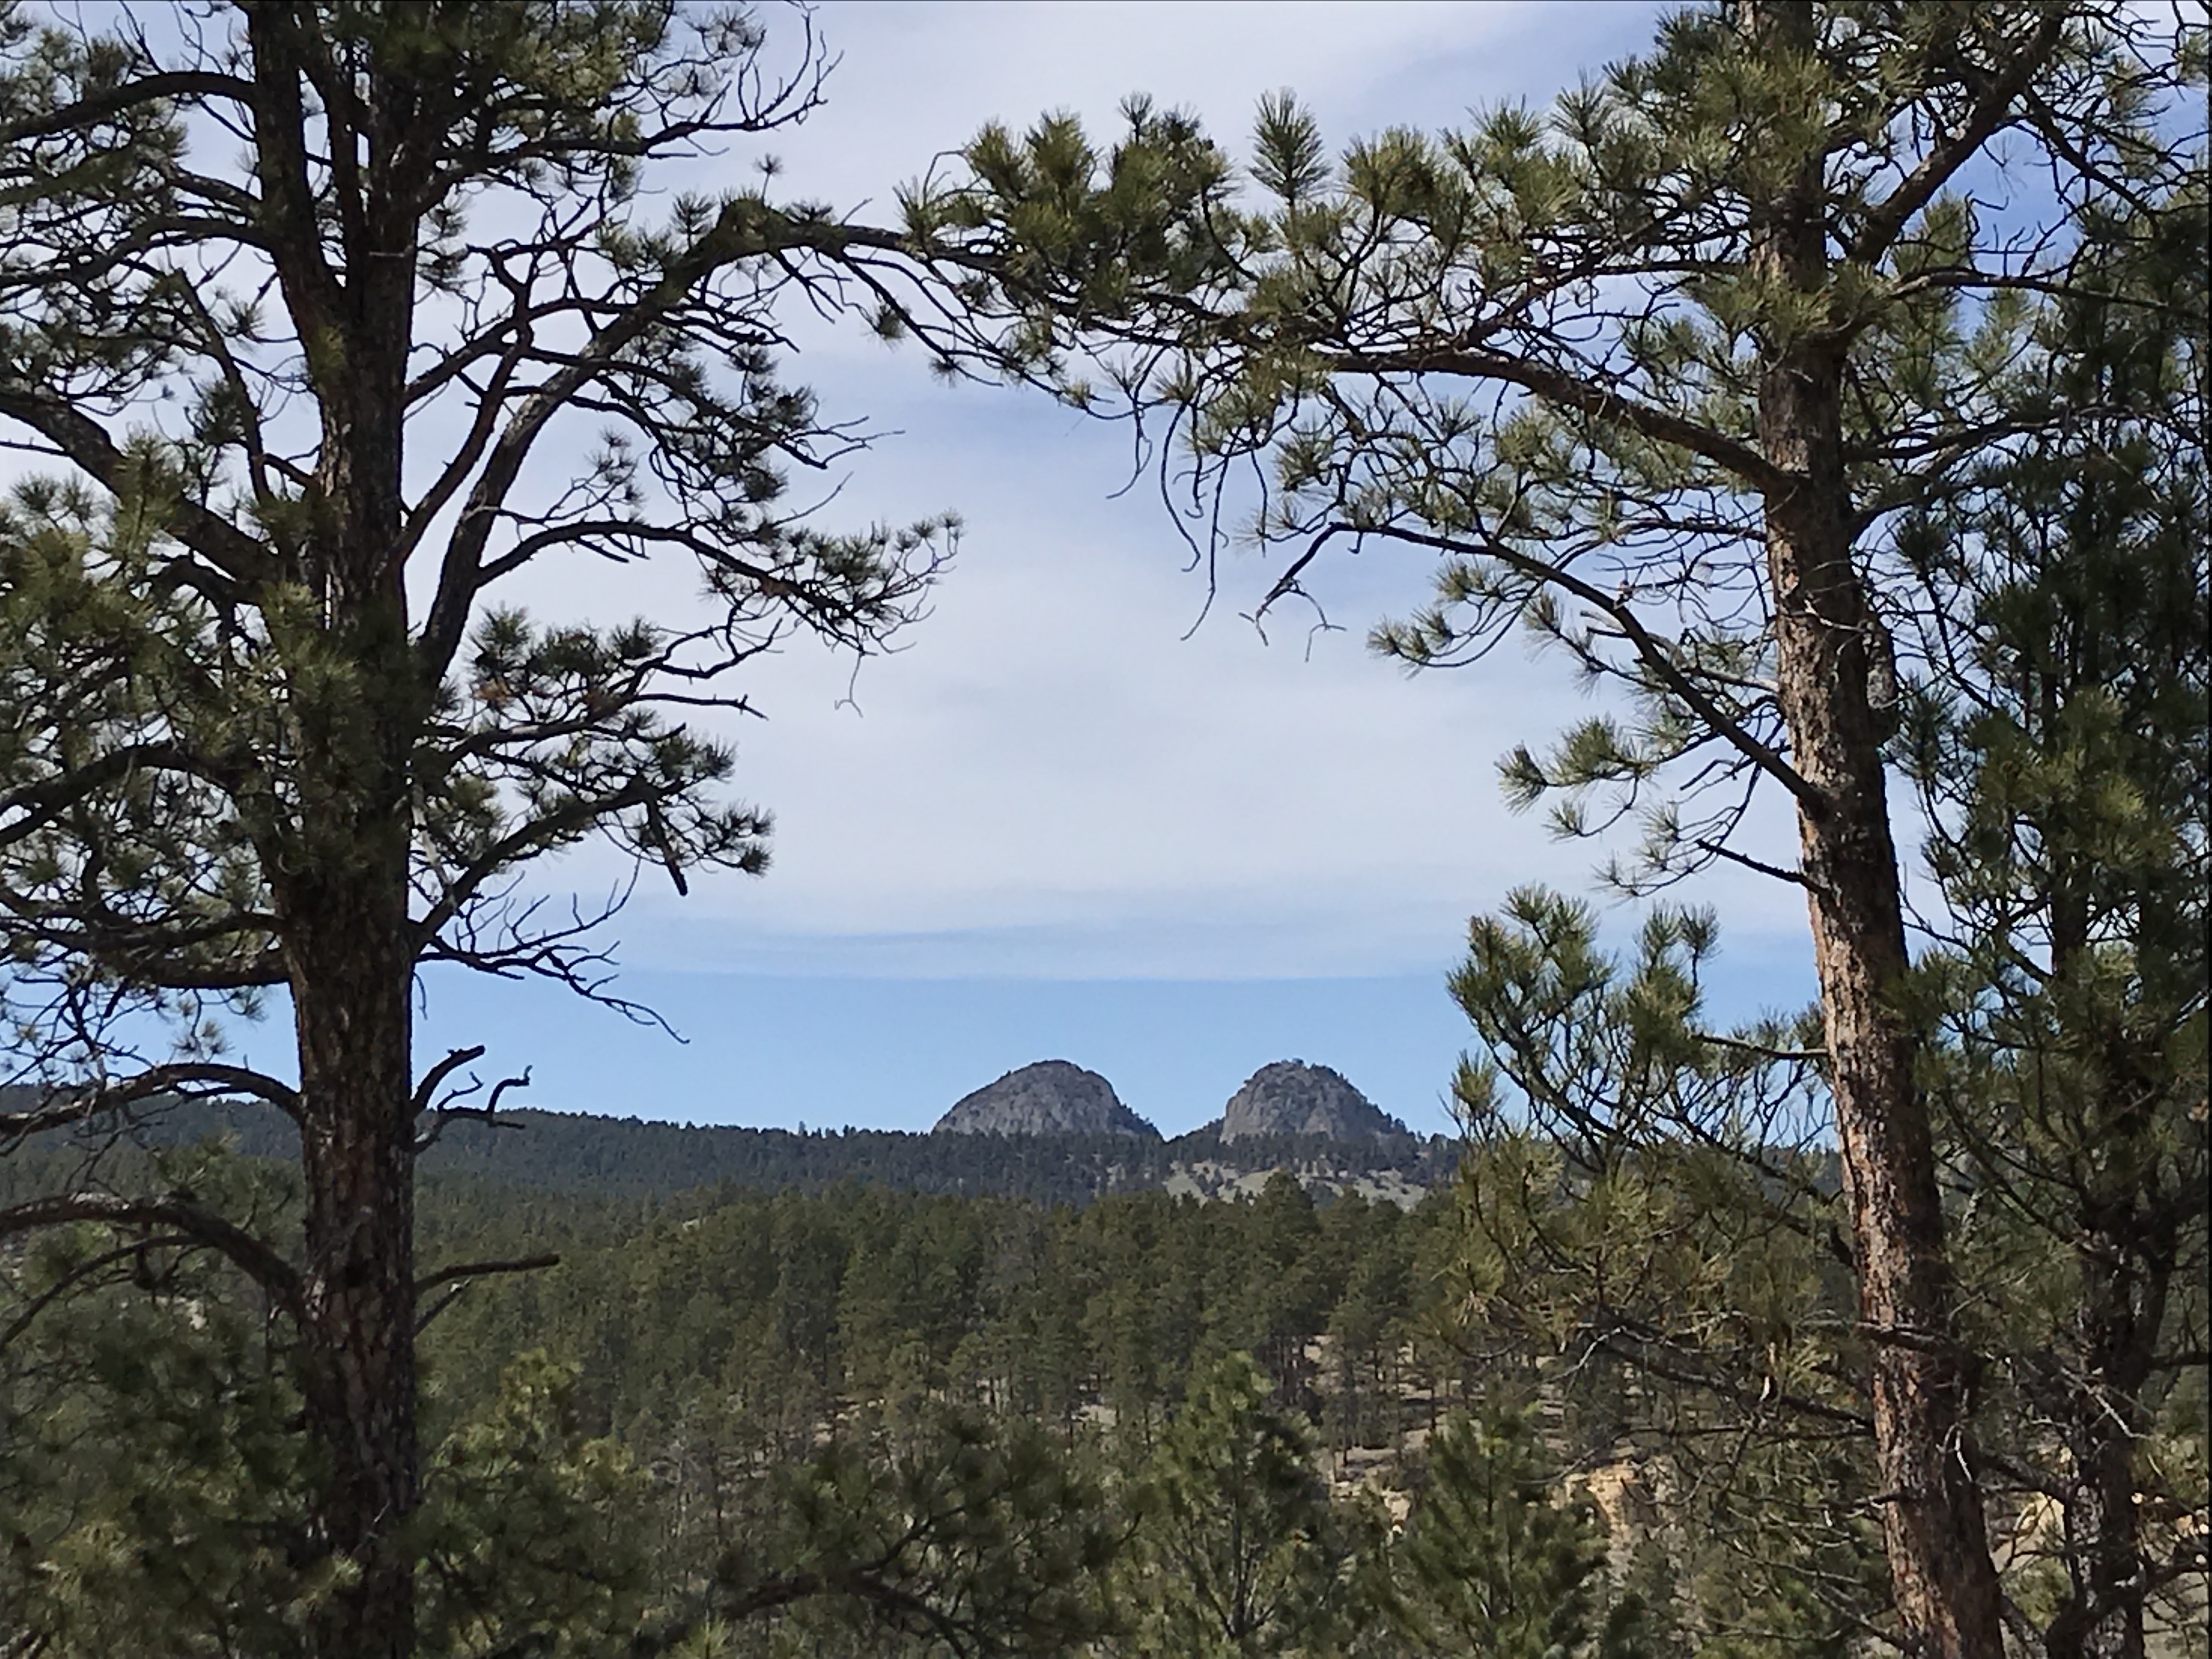 View from between two pine trees of pine tree-covered hills with two rocky mountains rising above them in the far background. 